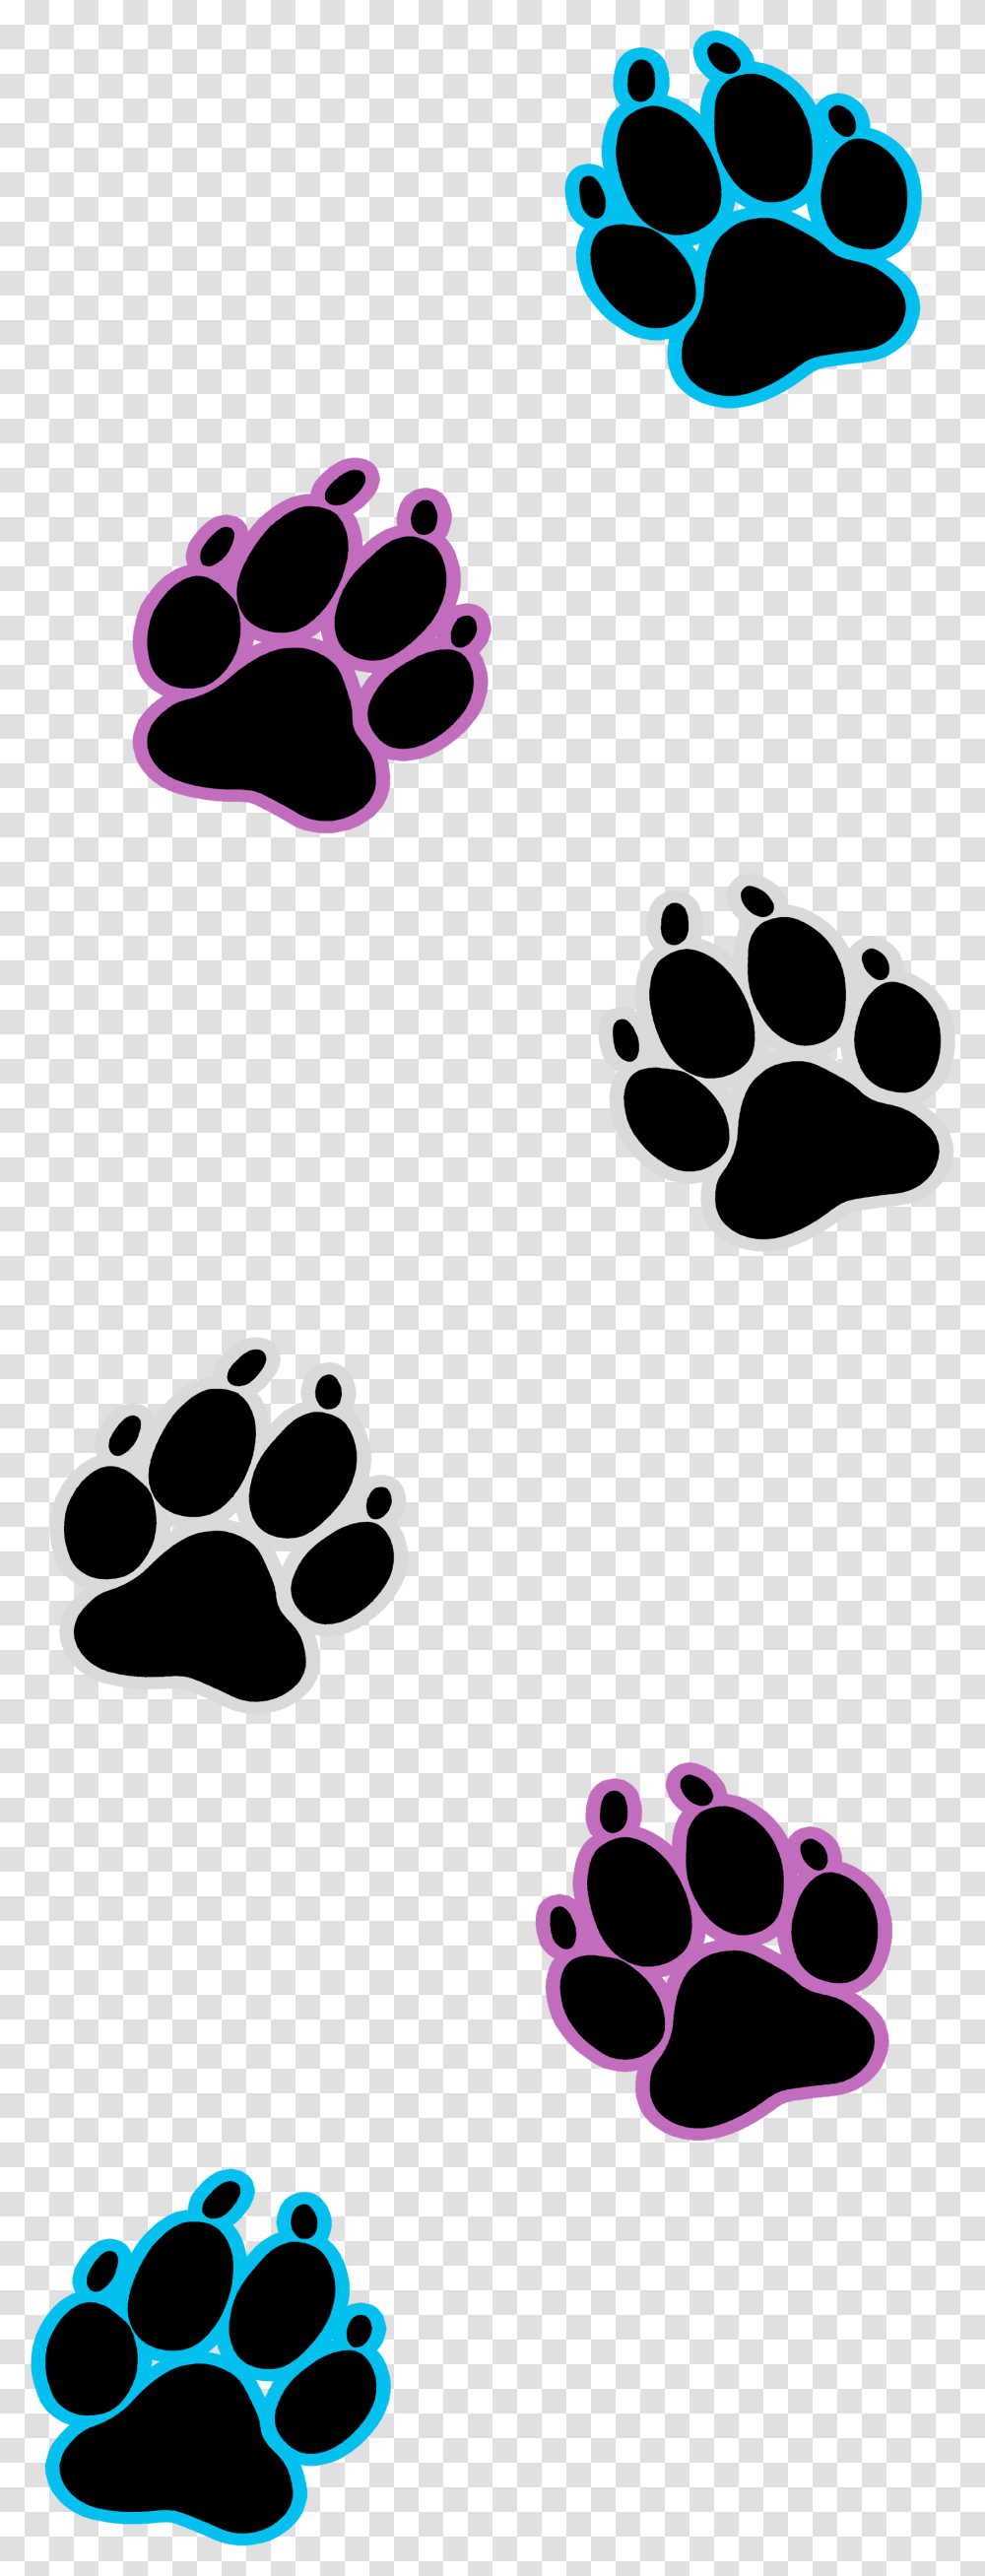 Dog Paw Prints Amp Clipart Free Download Paw Print Background With Dog, Footprint Transparent Png